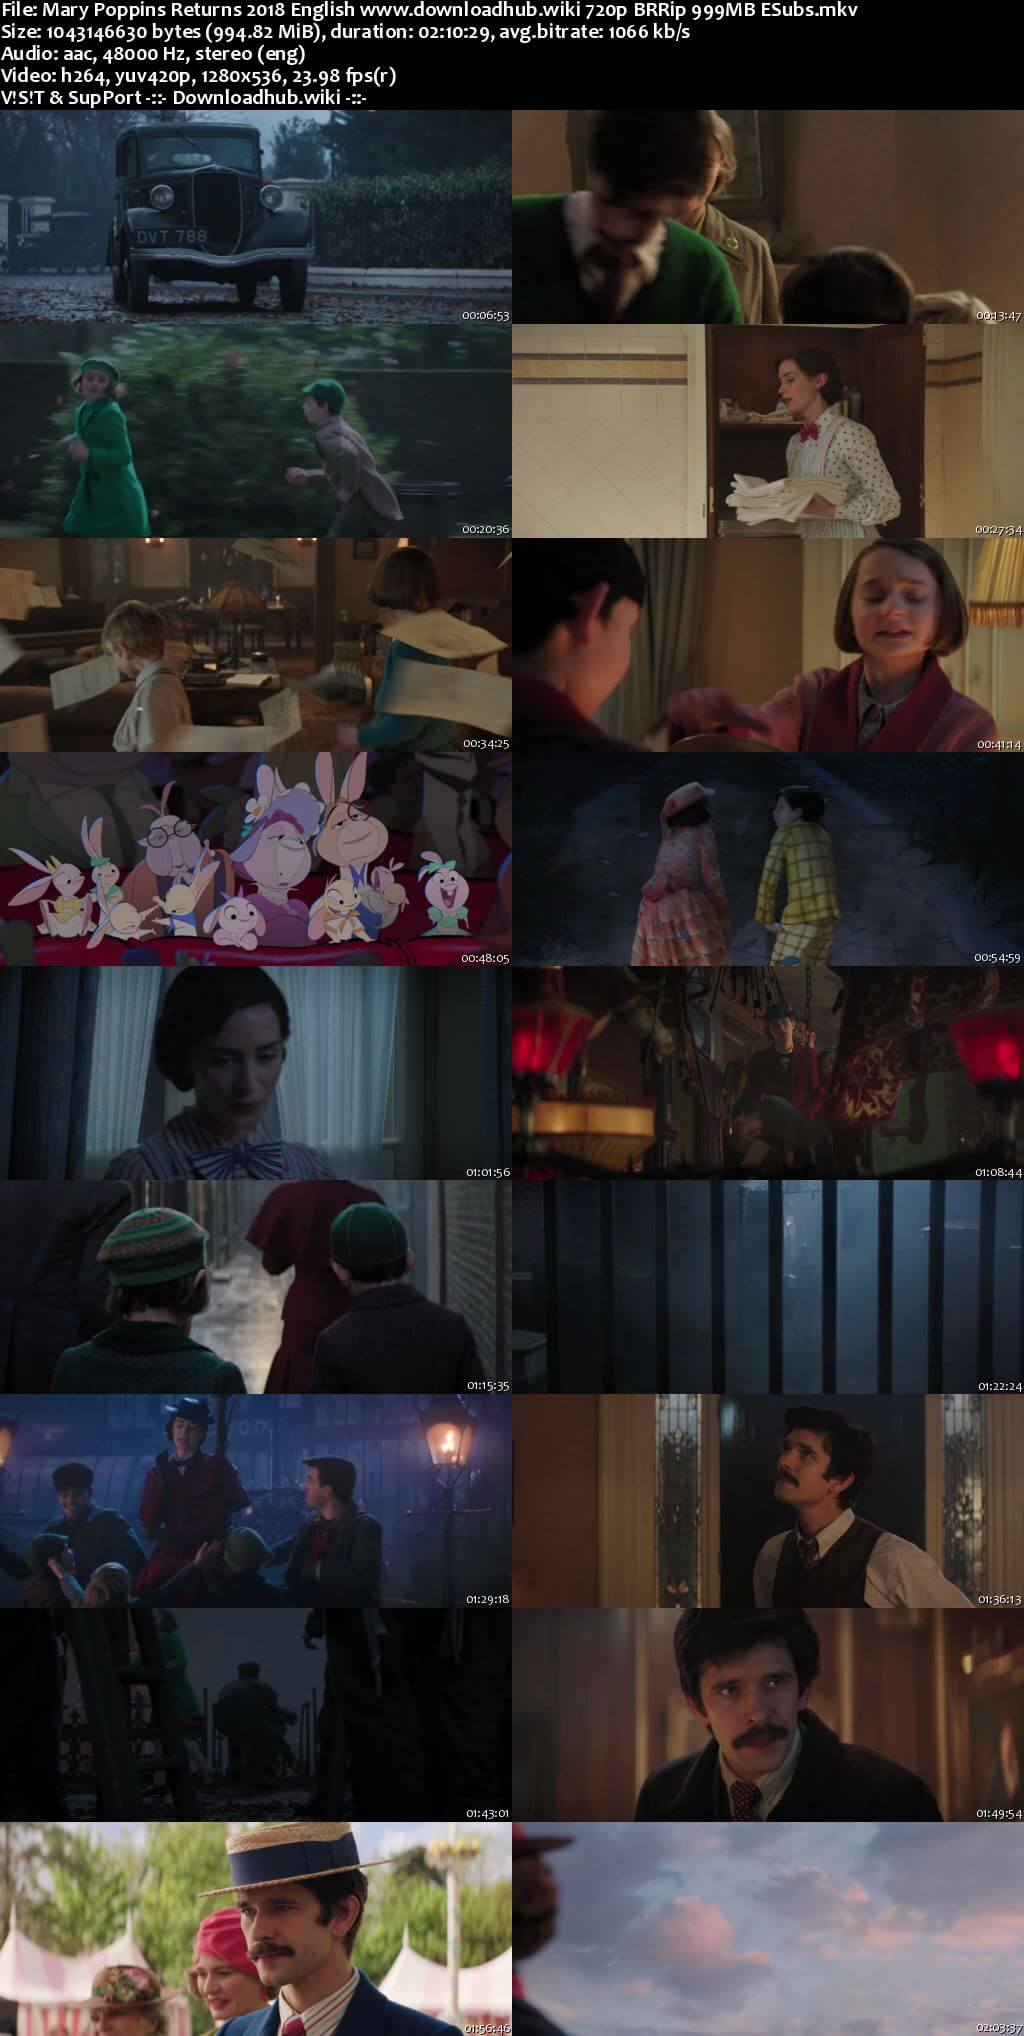 download torrent mary poppins 2018